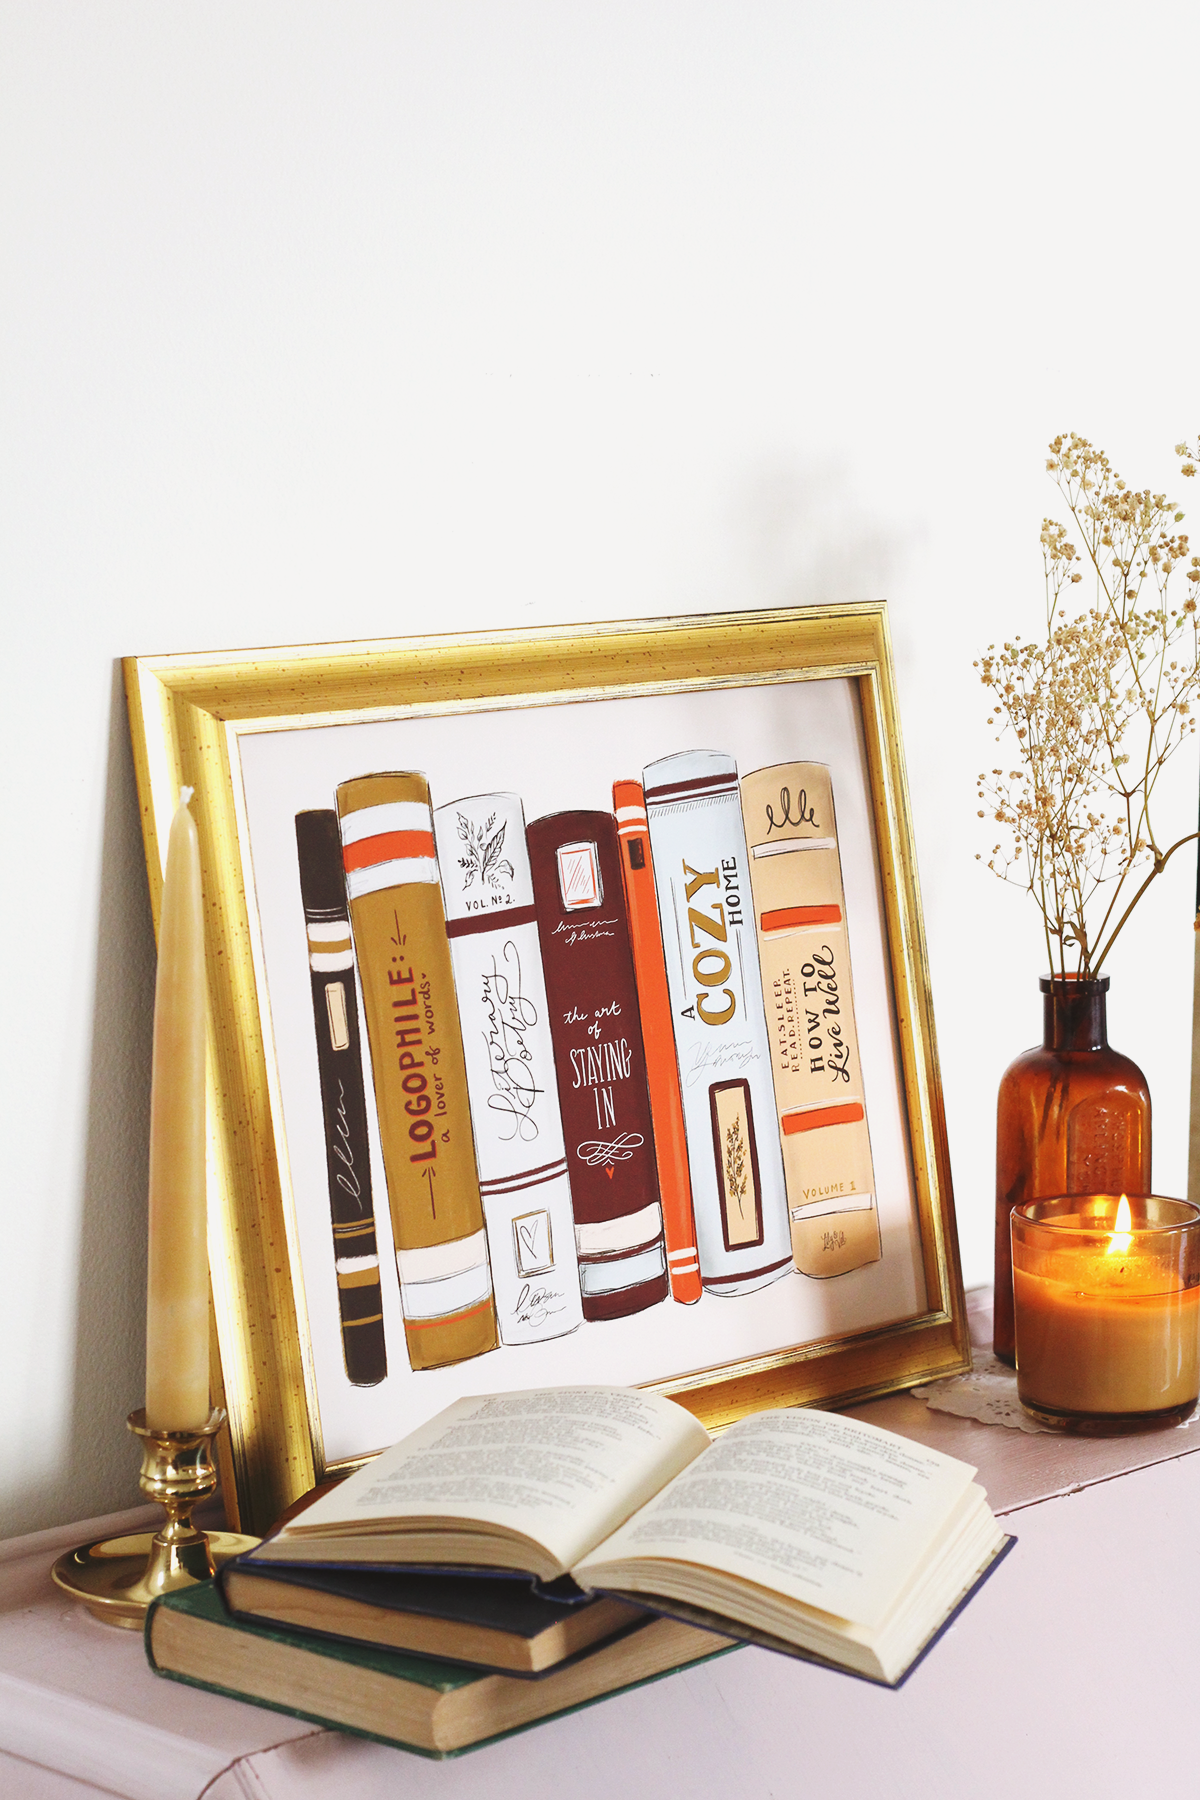 Fall Art for the Book Lover - Book Spine Illustration